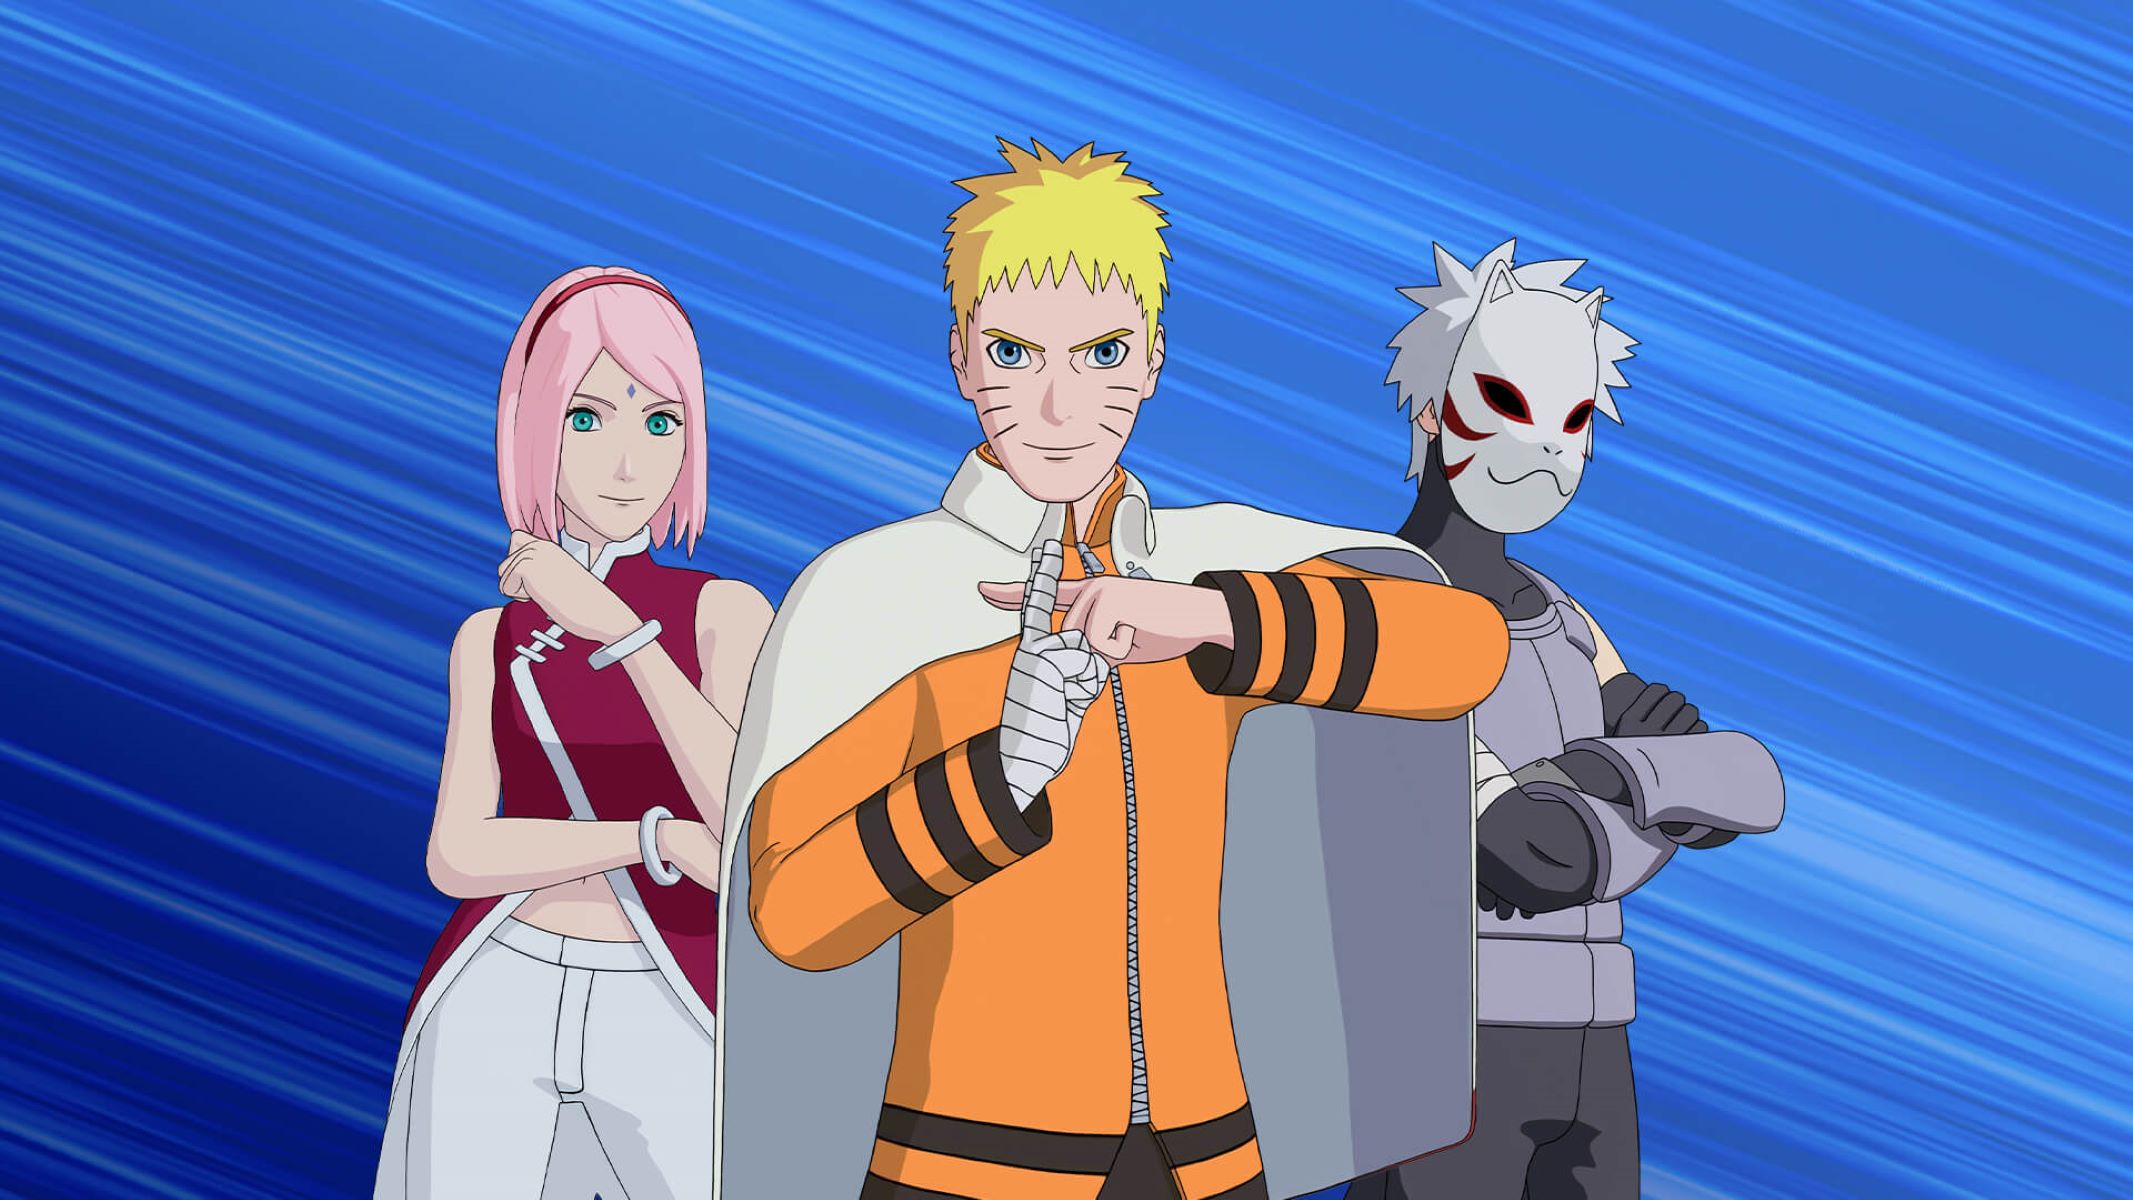 Naruto Skins Returning To Fortnite – Don’t Miss Out!